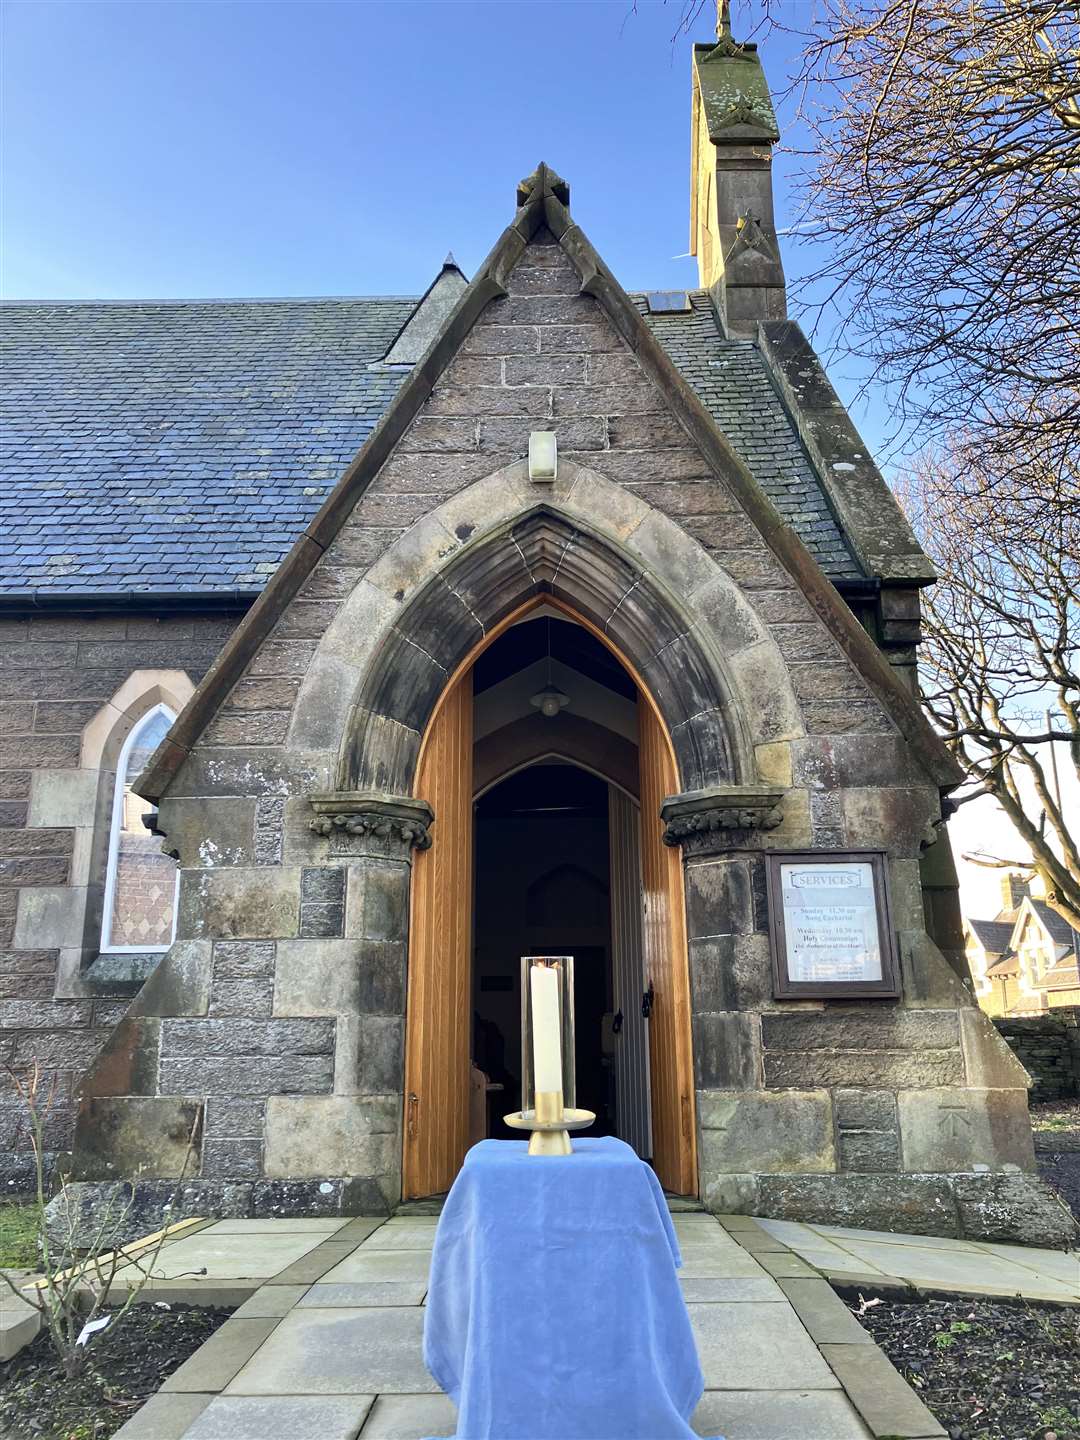 The candle outside St John’s Episcopal Church in Wick.